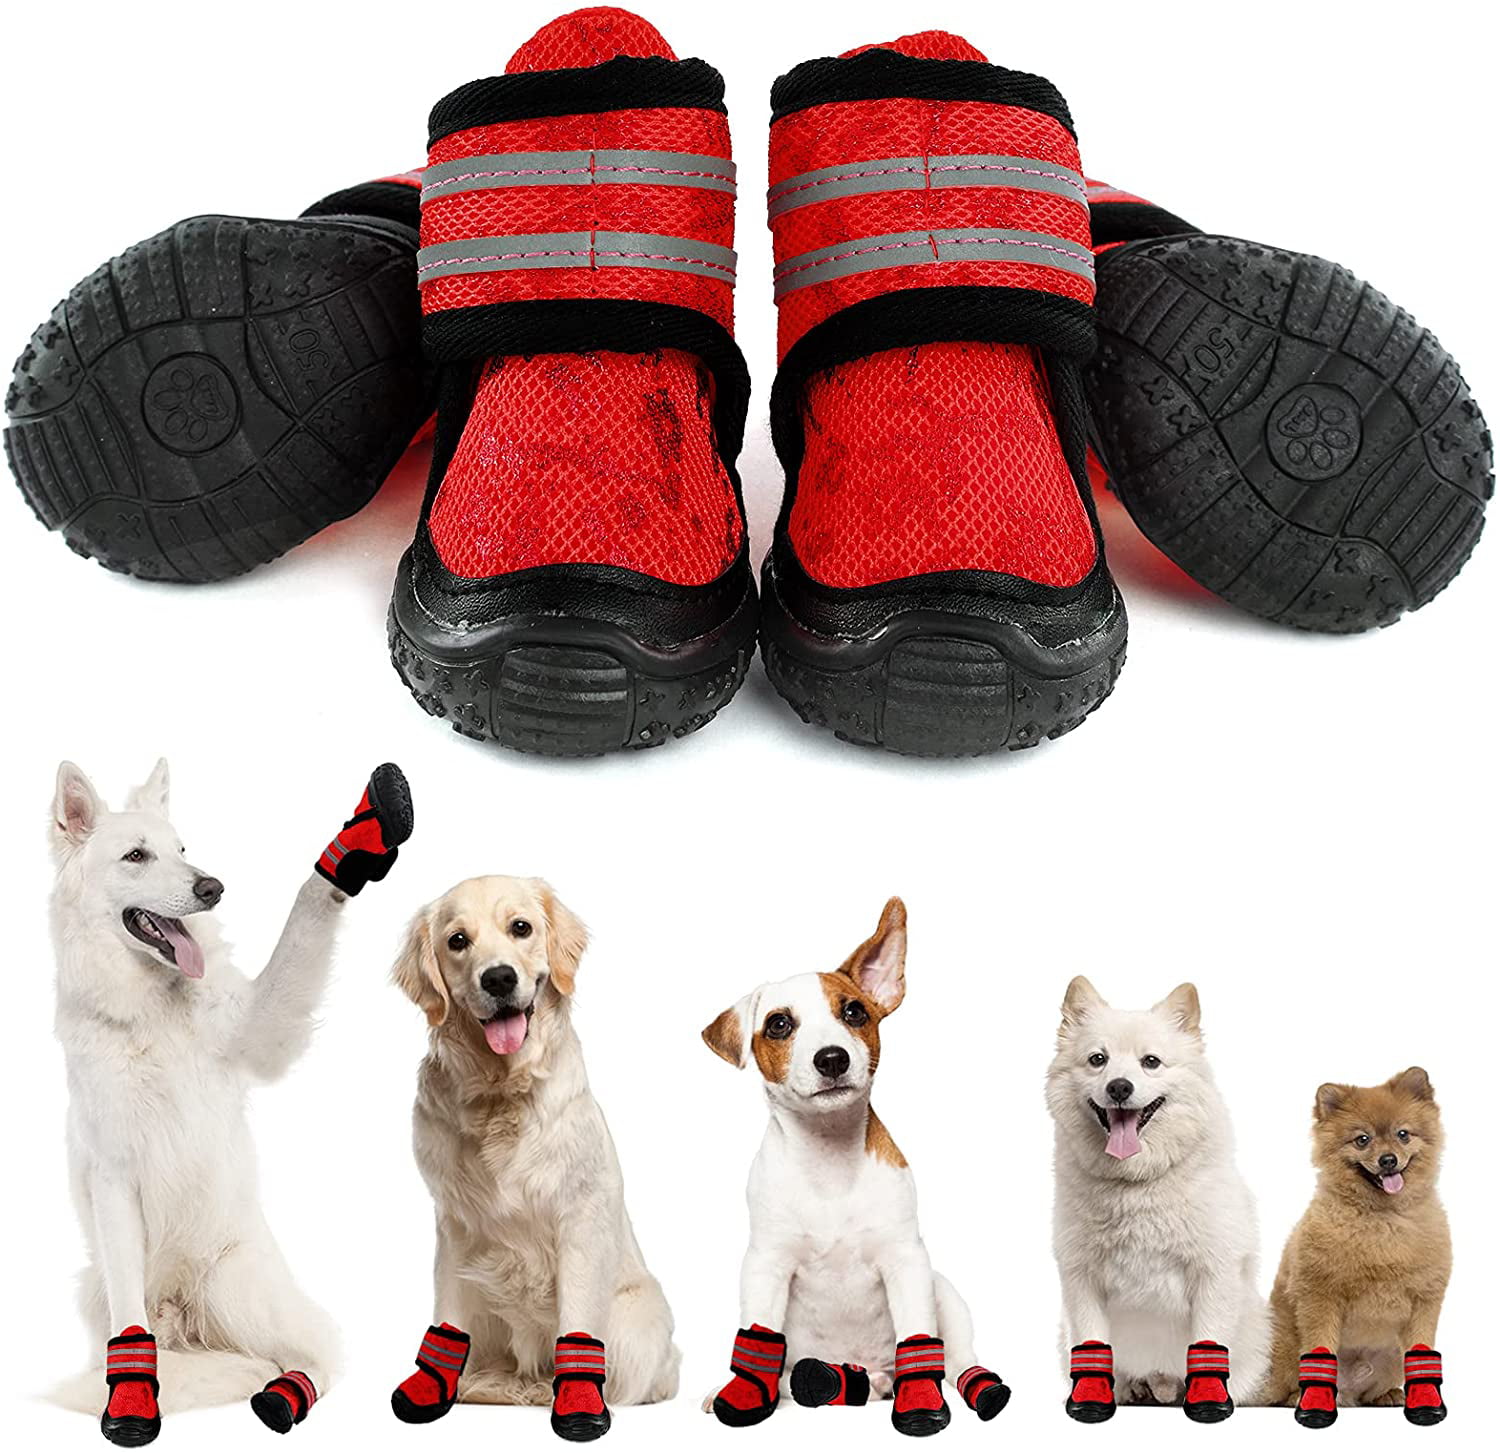 Indoor and Outdoor 4PCS Dog Outdoor Shoes with Adjustable Reflective Straps ​for Small Medium Large Dogs Paw Protectors for Hiking Dog Boots Anti-Slip Dog Shoes 